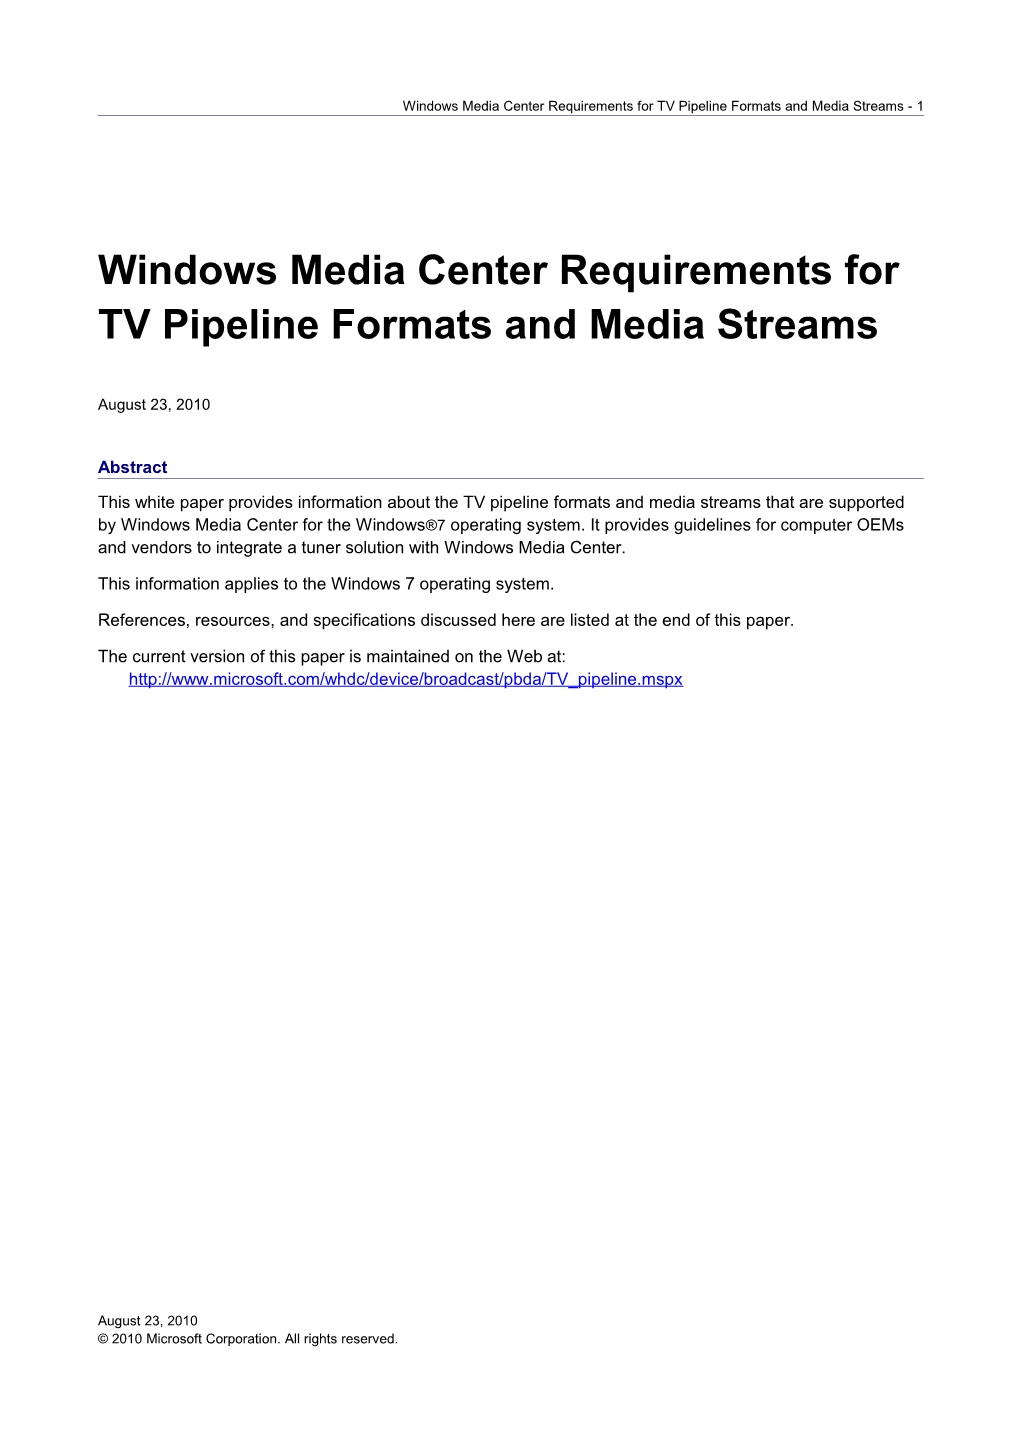 Windows Media Center Requirements for TV Pipeline Formats and Media Streams - 13